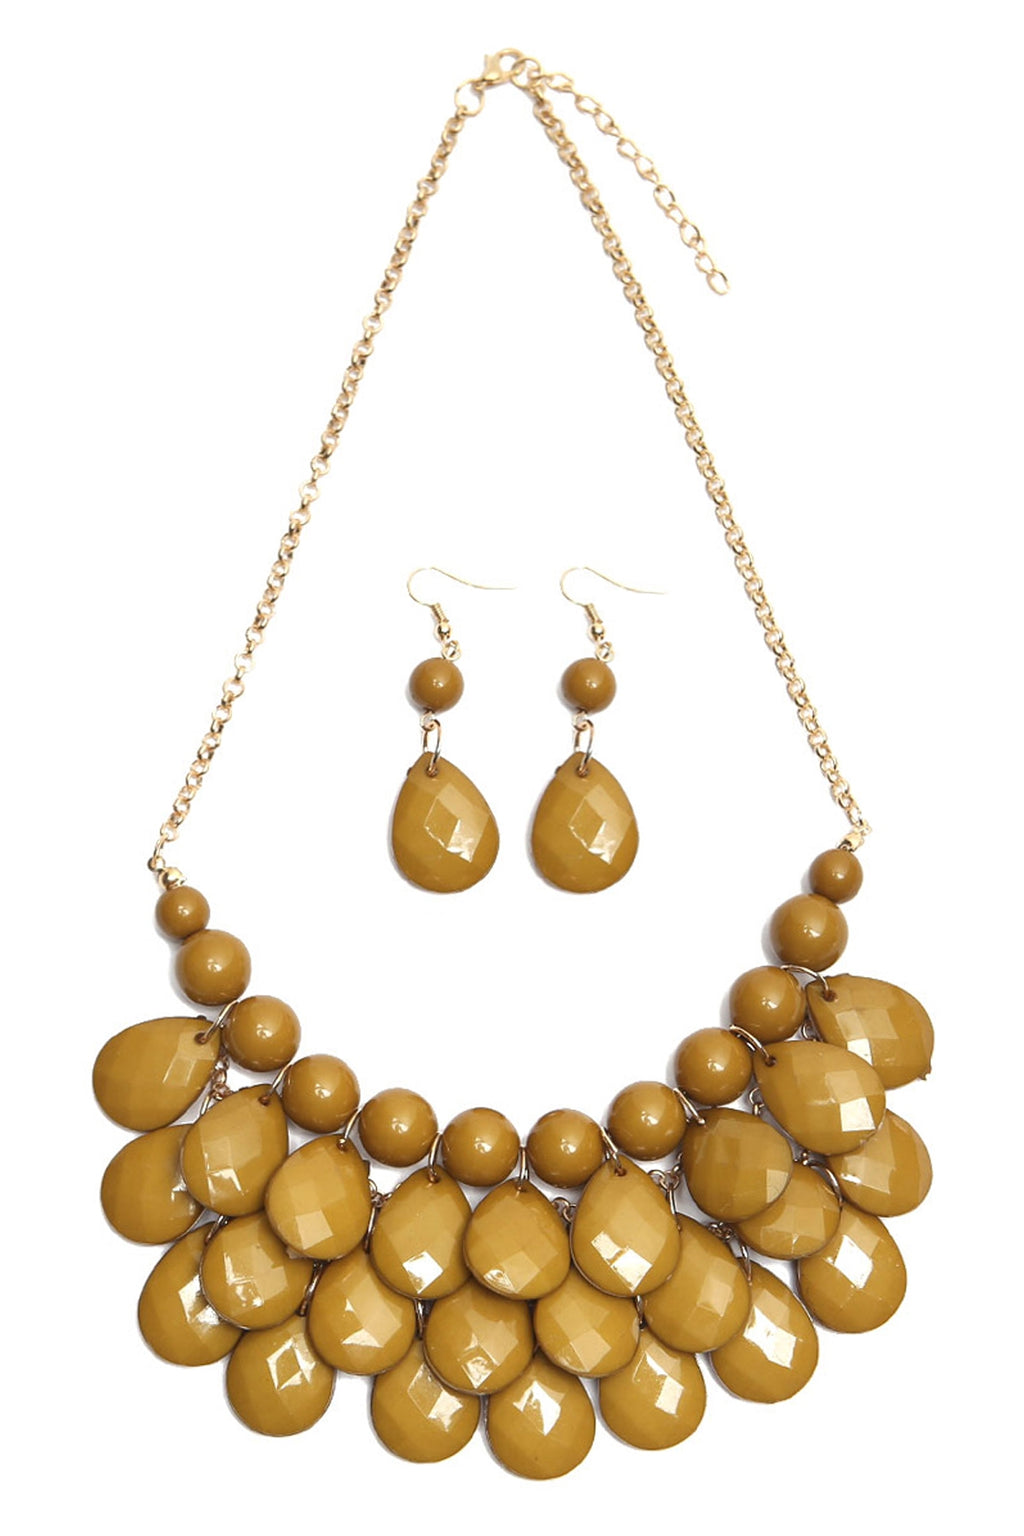 Olive Teardrop Bubble Bib Necklace and Earring Set - Pack of 6